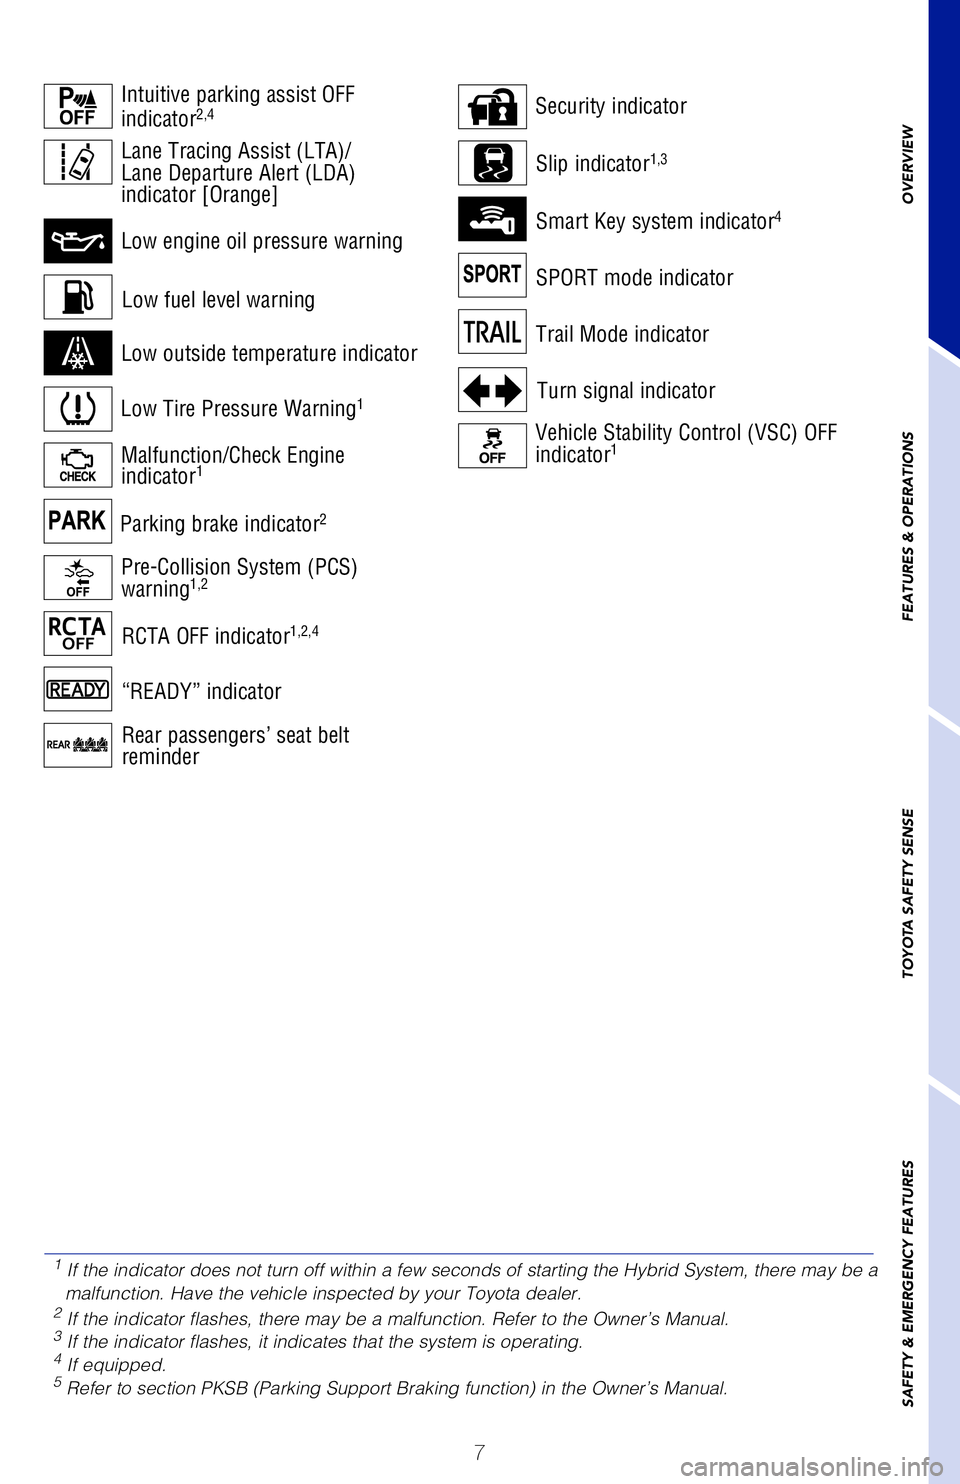 TOYOTA RAV4 HYBRID 2020  Owners Manual (in English) 1 If the indicator does not turn off within a few seconds of starting the \
Hybrid System, there may be a 
malfunction. Have the vehicle inspected by your Toyota dealer.
2 If the indicator flashes, th